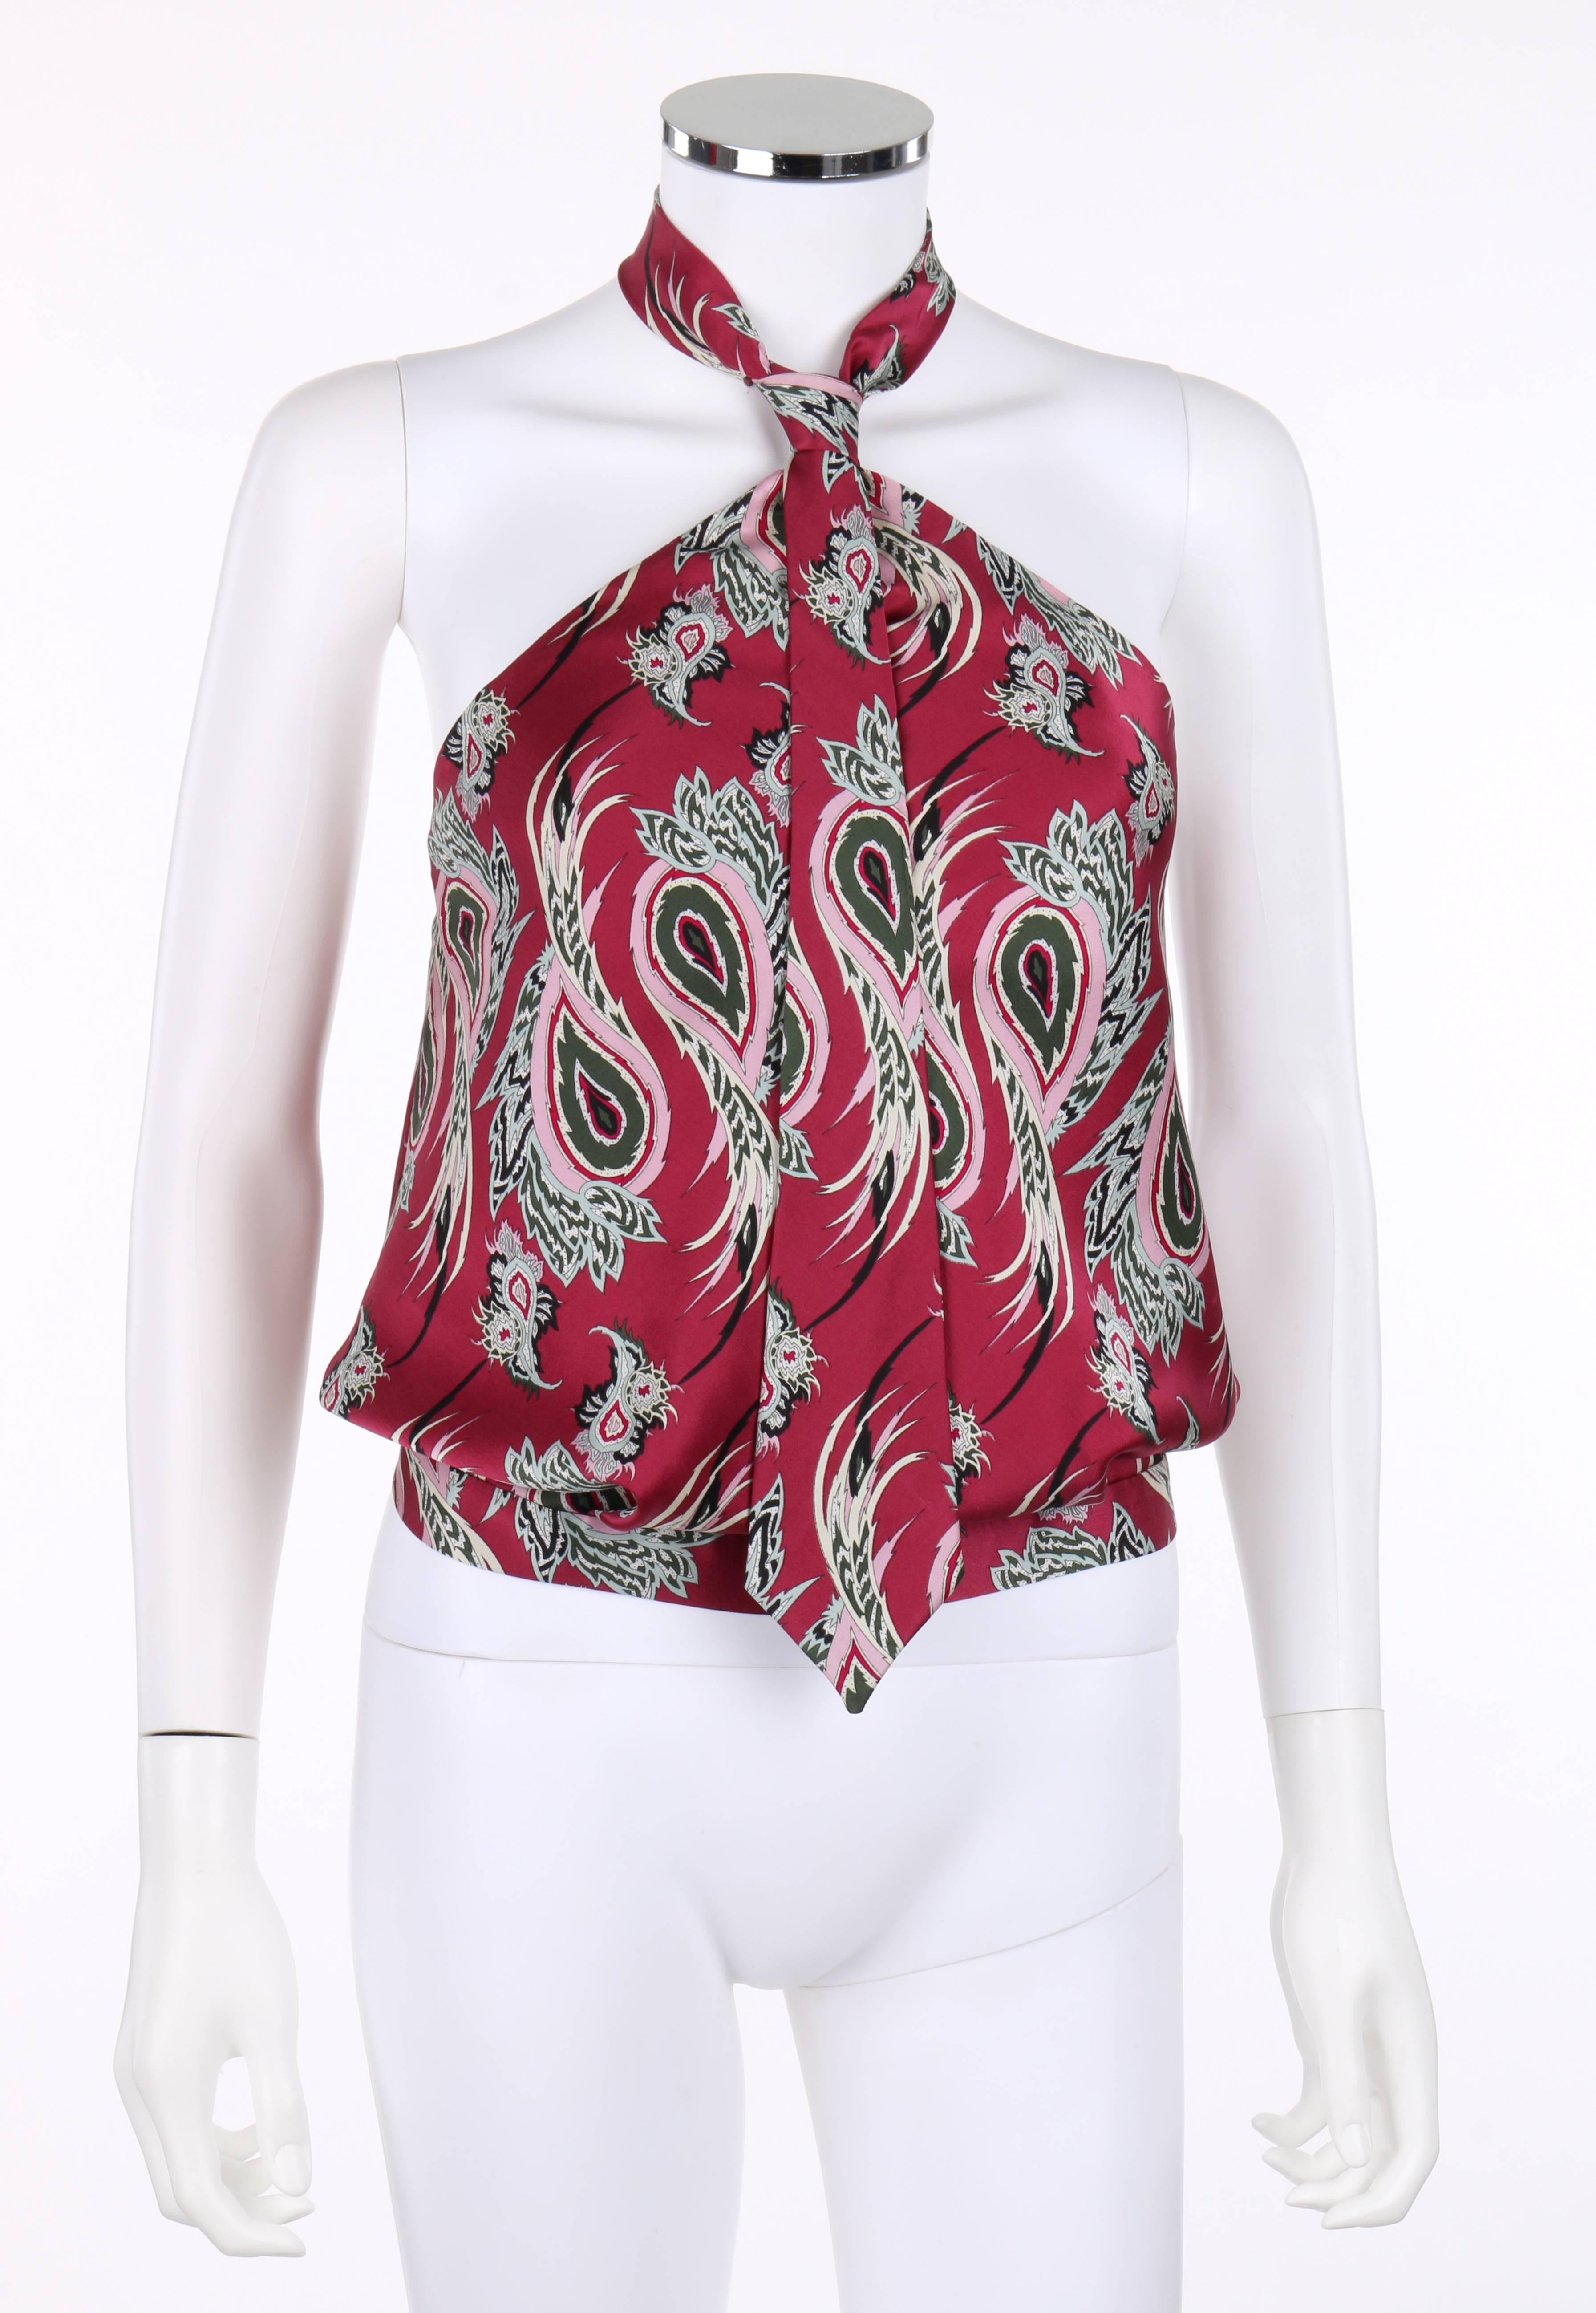 Alexander McQueen S/S 2001 burgundy silk halter top. From Alexander McQueen's "Voss" collection. All over paisley print in shades of white, green, black, pink, and light blue. Halter neckline with built in self tie necktie. Low back.